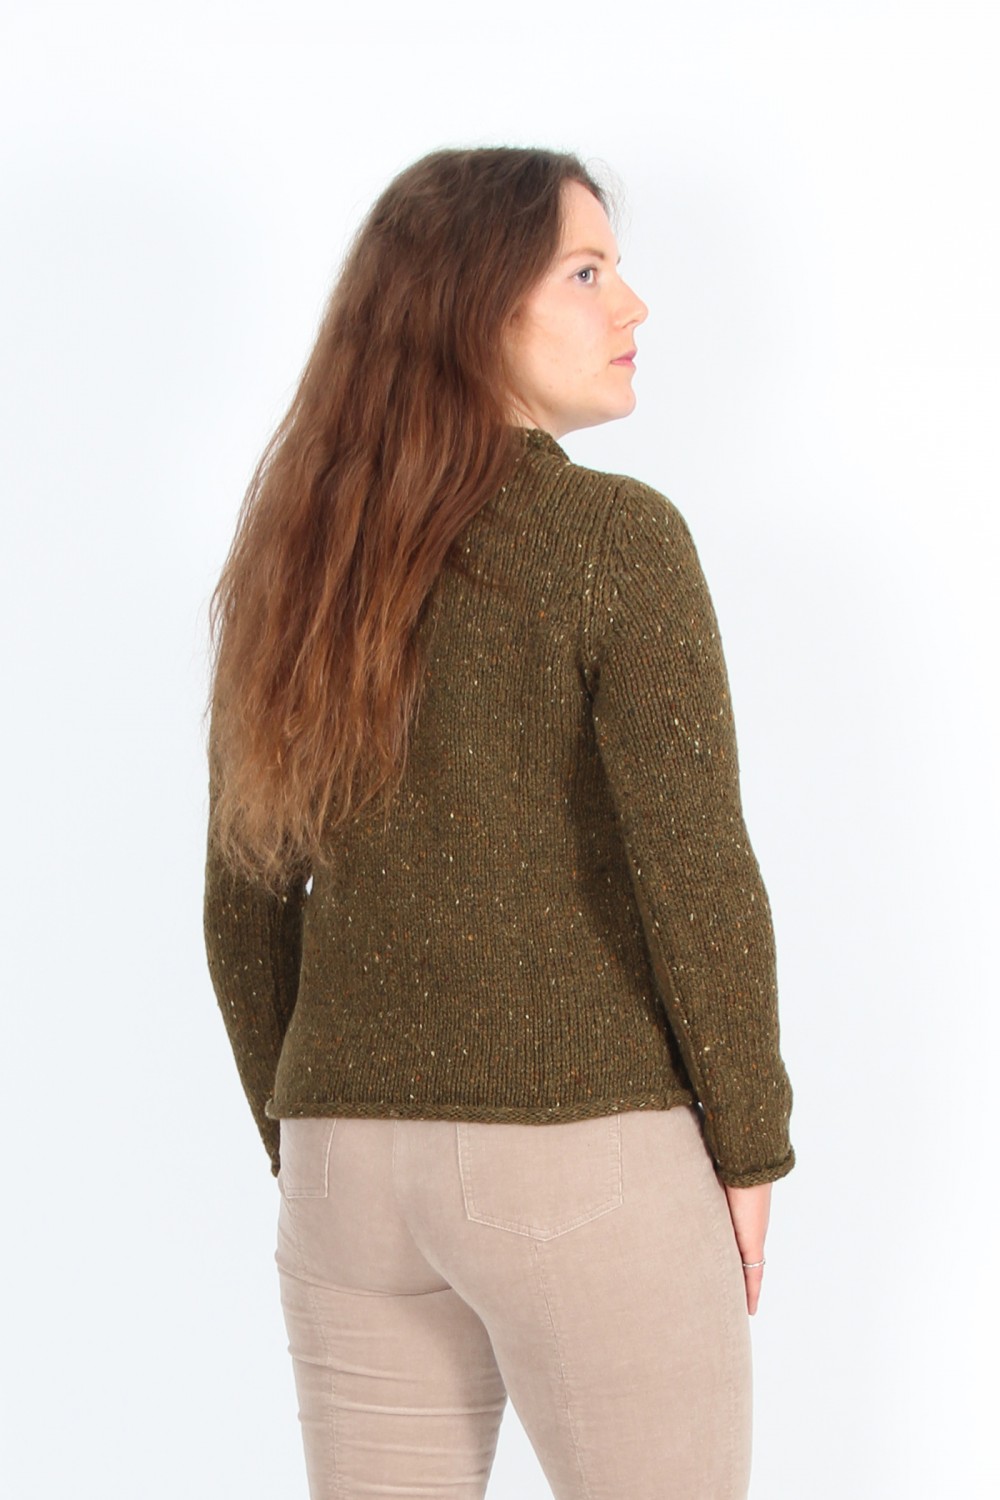 Fisherman Out of Ireland Rolled Edge Knit Olive